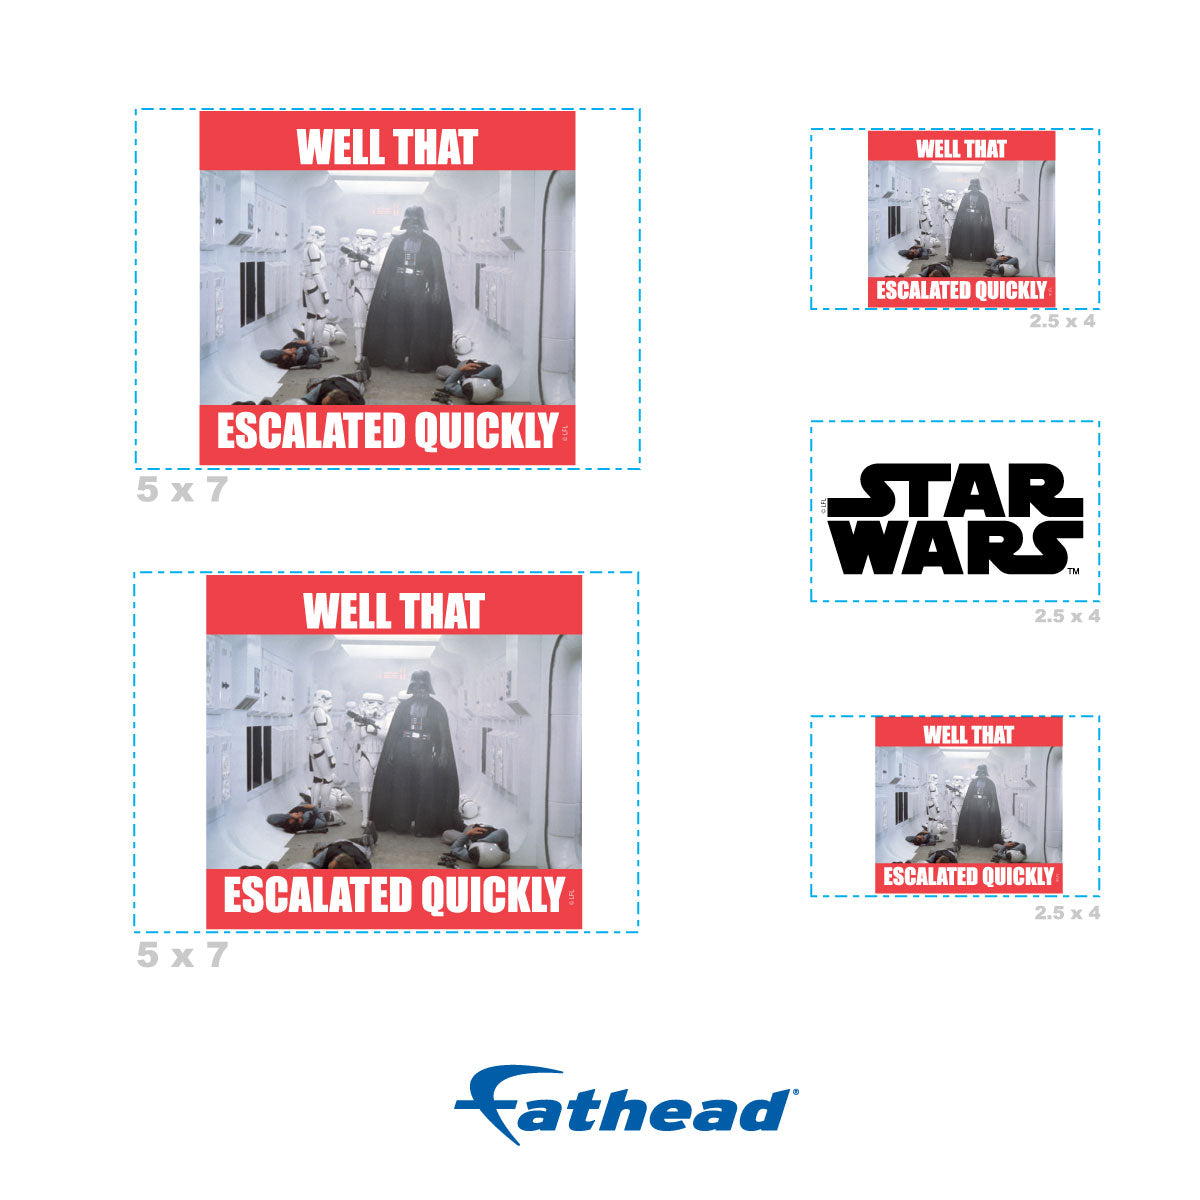 Well That Escalated Quickly meme Minis        - Officially Licensed Star Wars Removable     Adhesive Decal